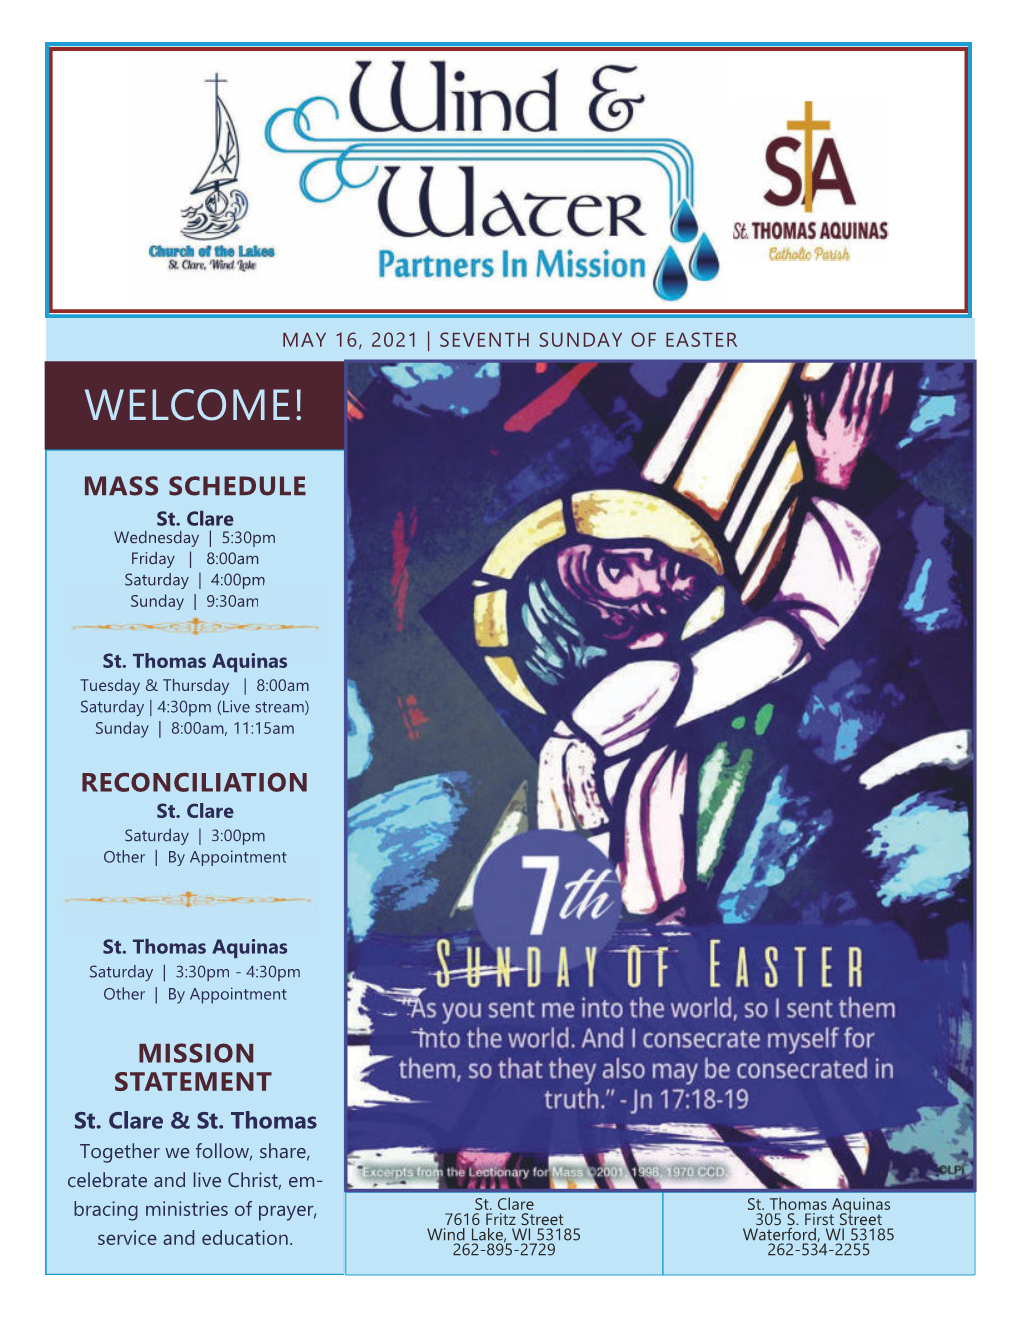 WORSHIP TOGETHER May 16, 2021 Mass Intentions - St